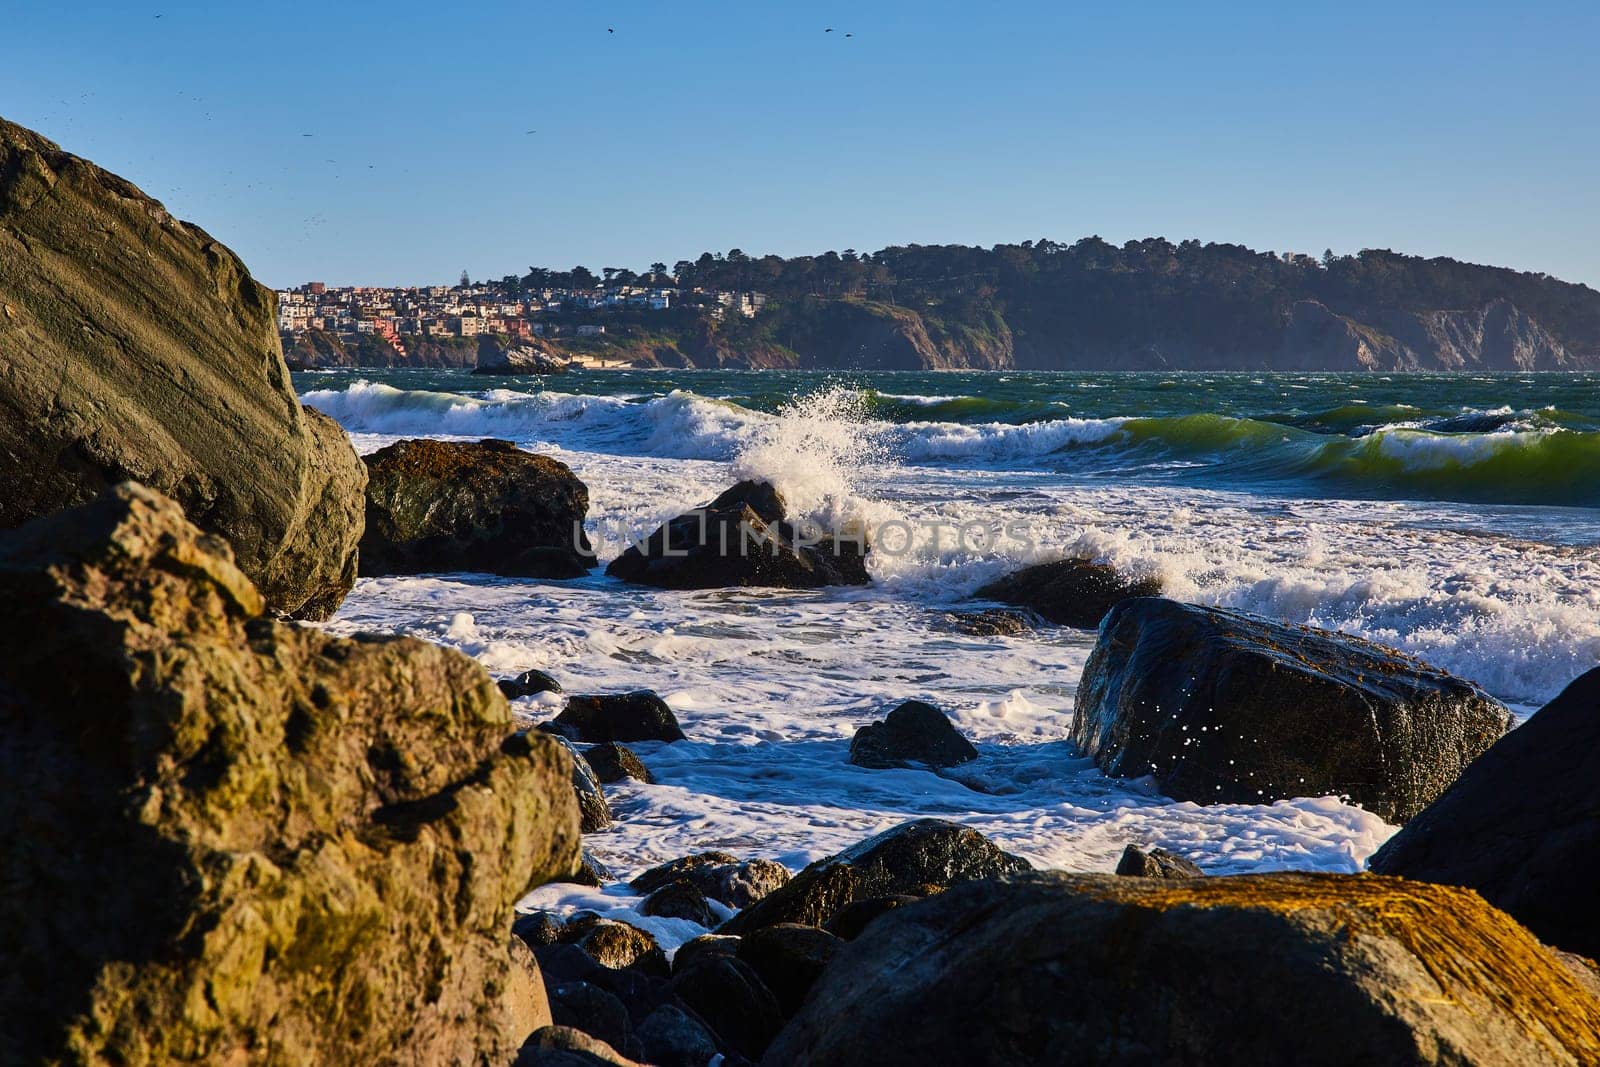 Image of Big waves rolling into massive boulders with ocean spray around partially submerged rock